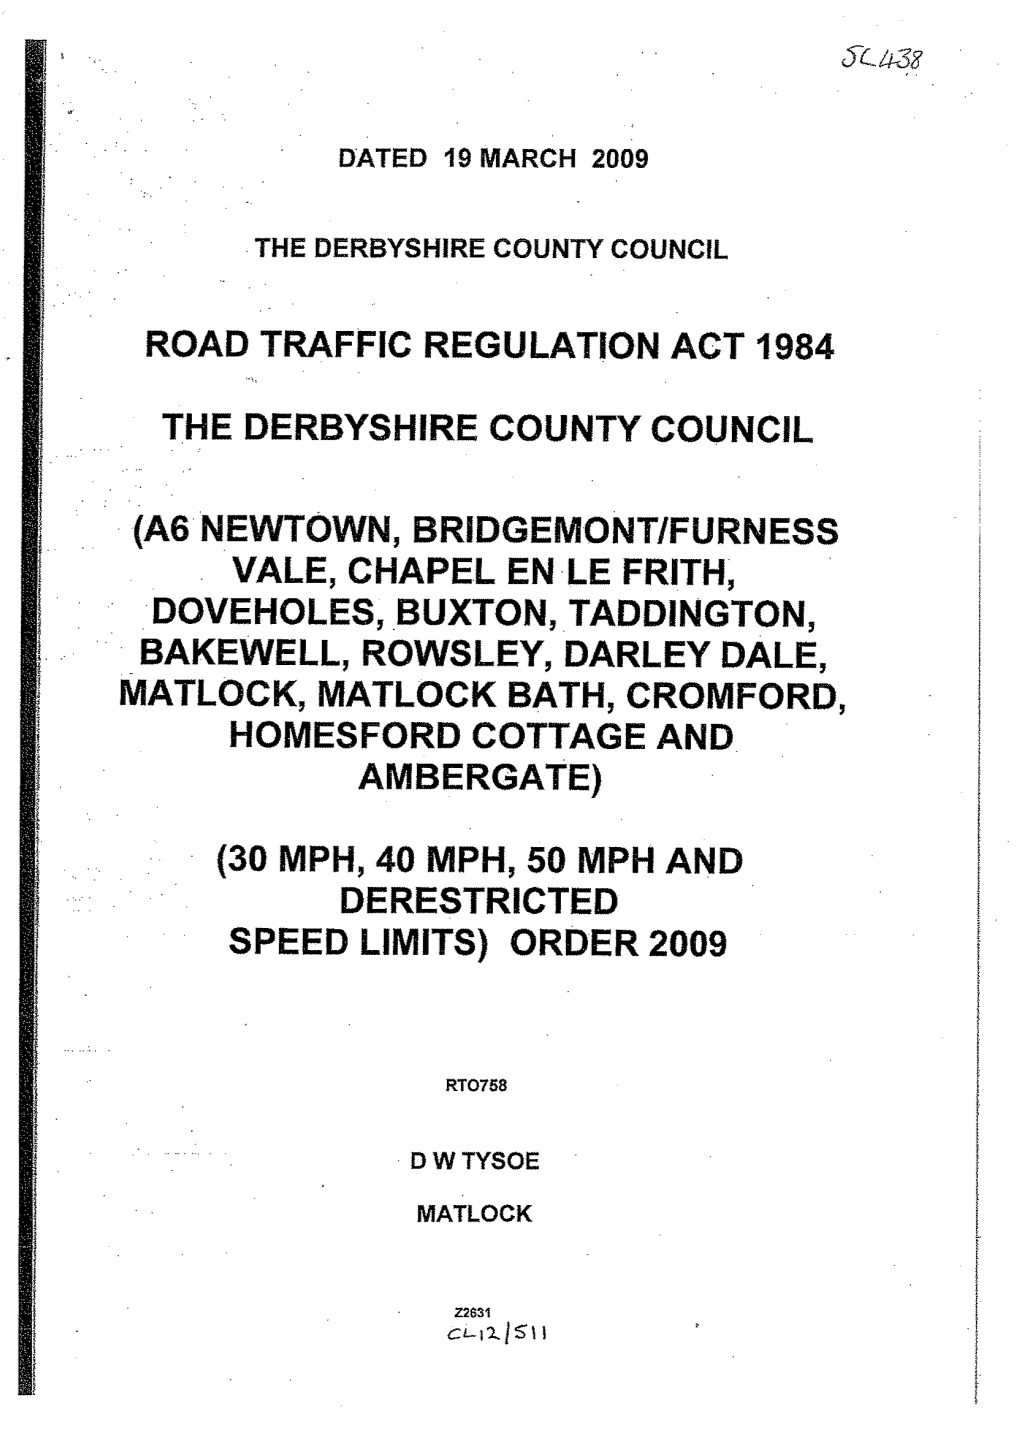 Road Traffic Regulation Act 1984 the Derbyshire County